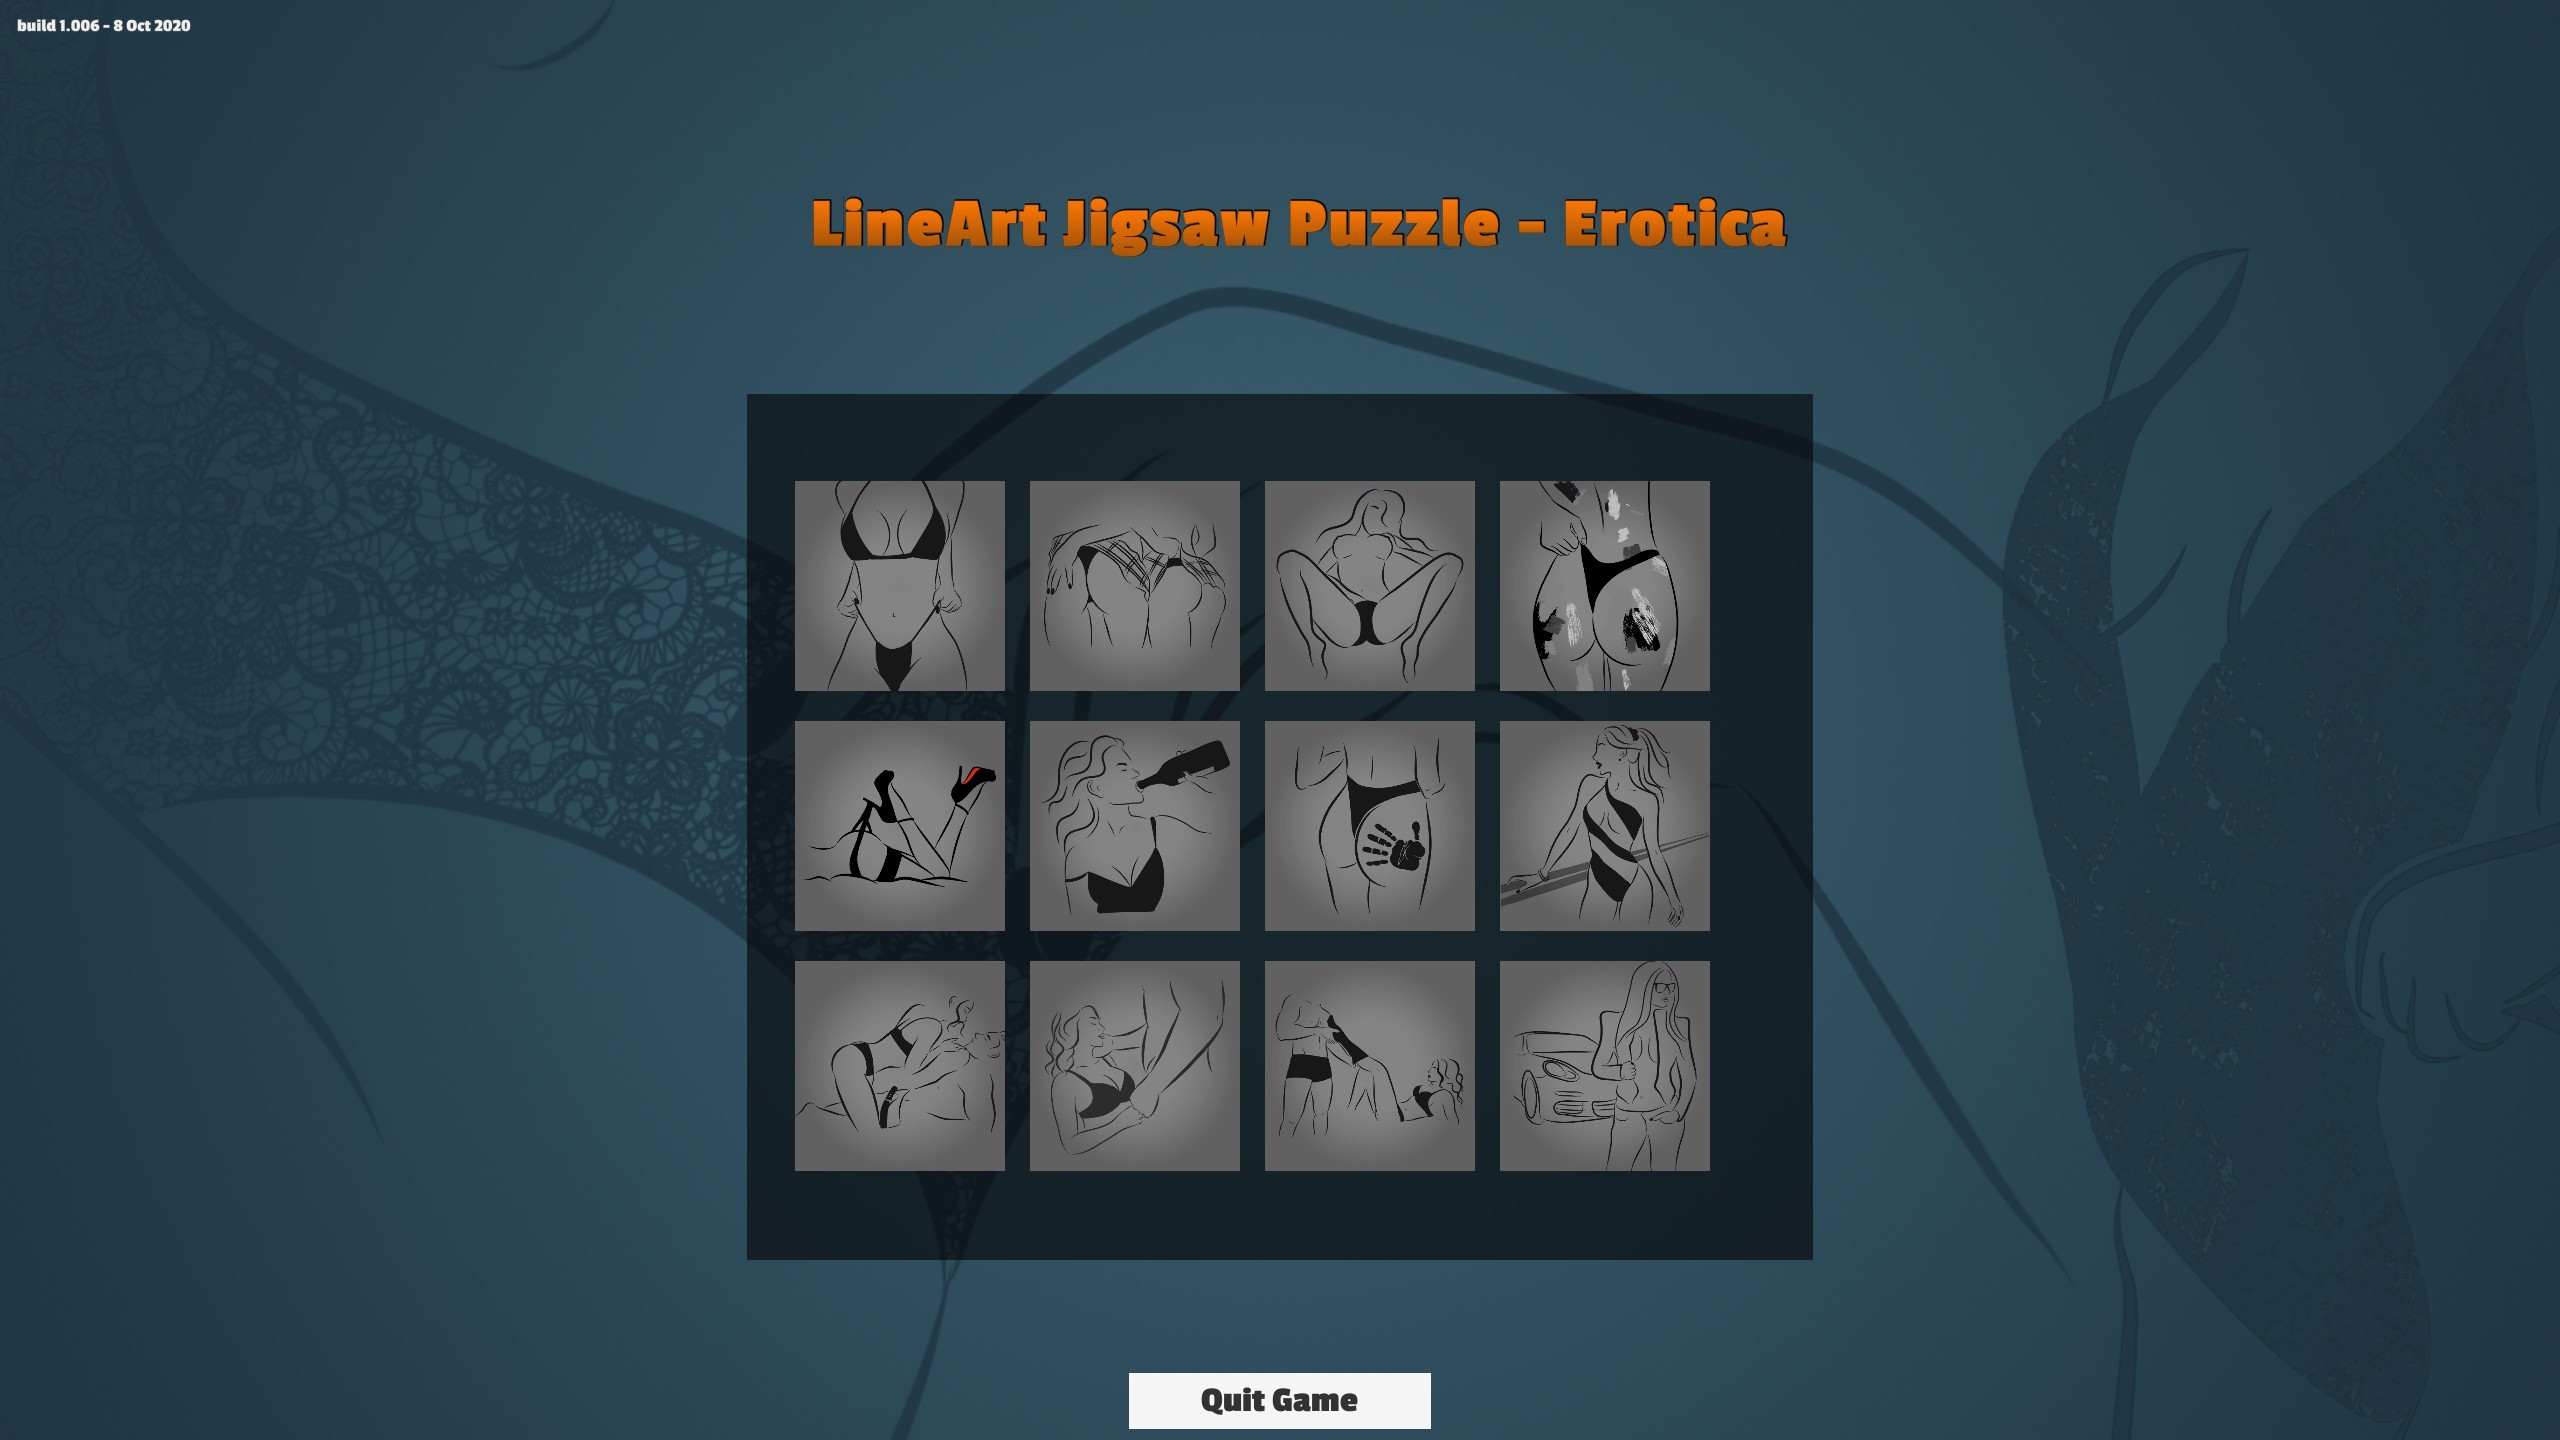 LineArt Jigsaw Puzzle - Erotica Steam CD Key 0.21 $